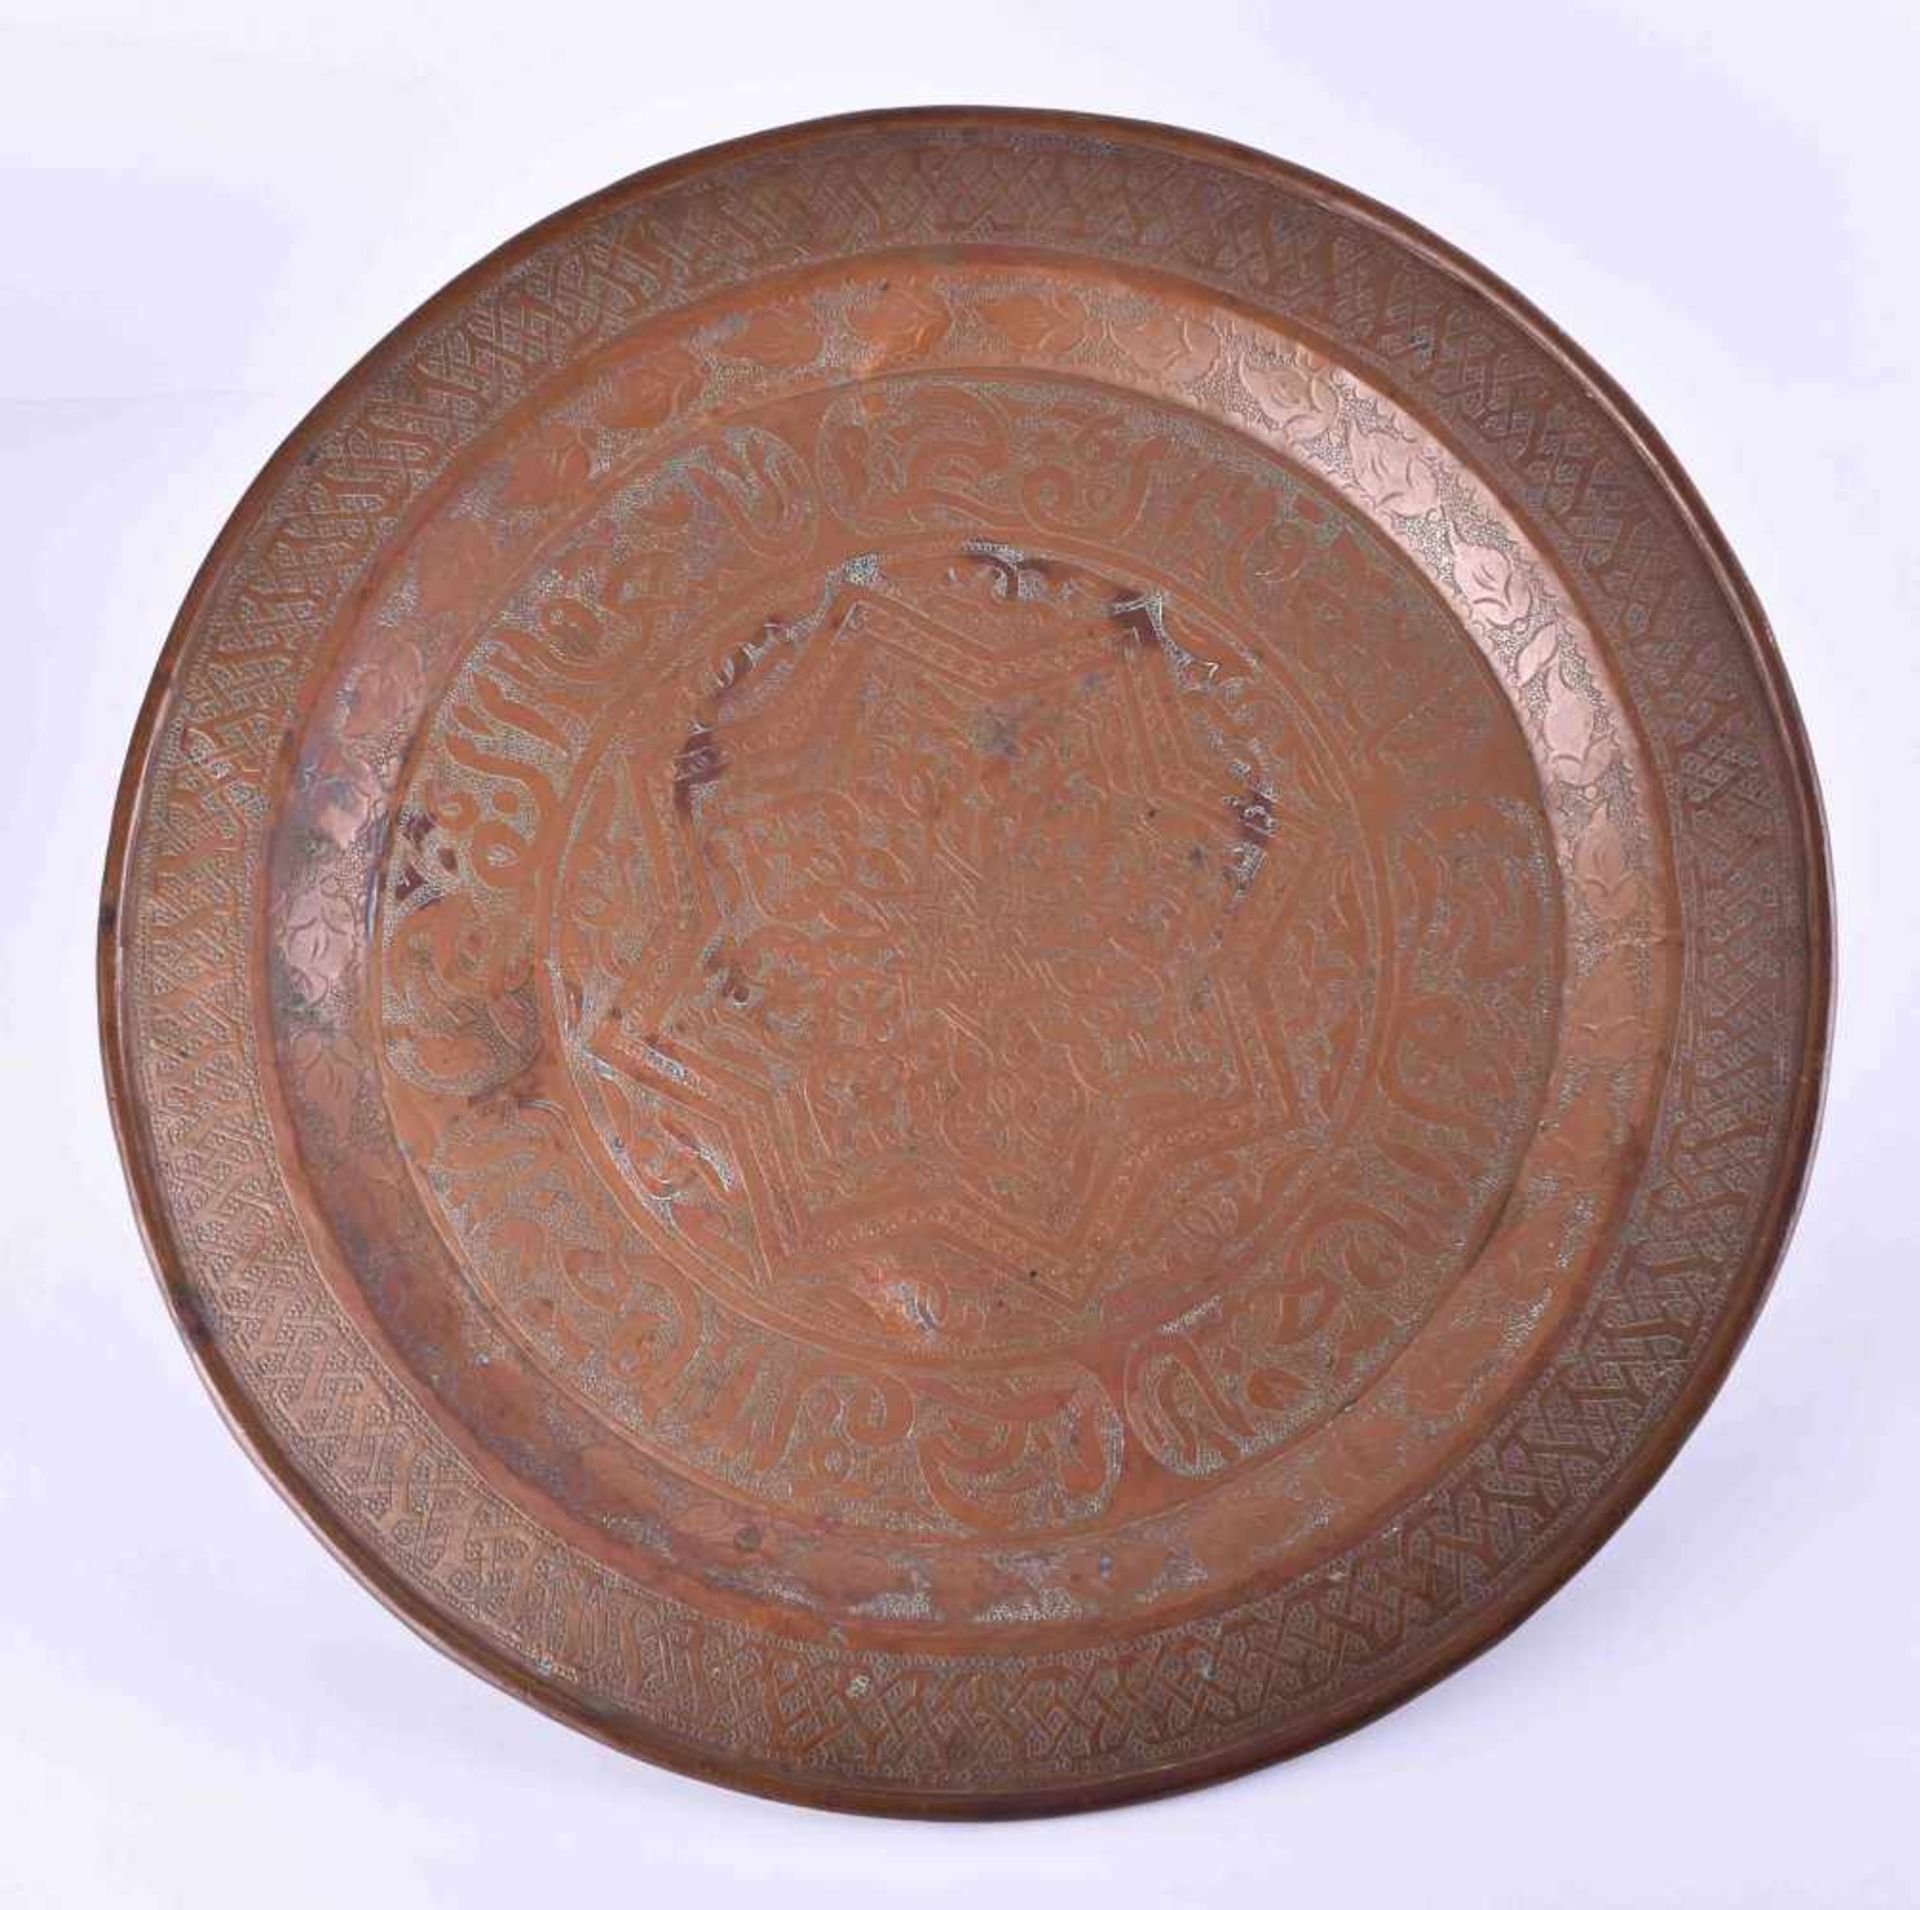 Plate Mameluk 19th centurycopper, finely chased with ornaments and calligraphy, Ø 47.5 cmTeller